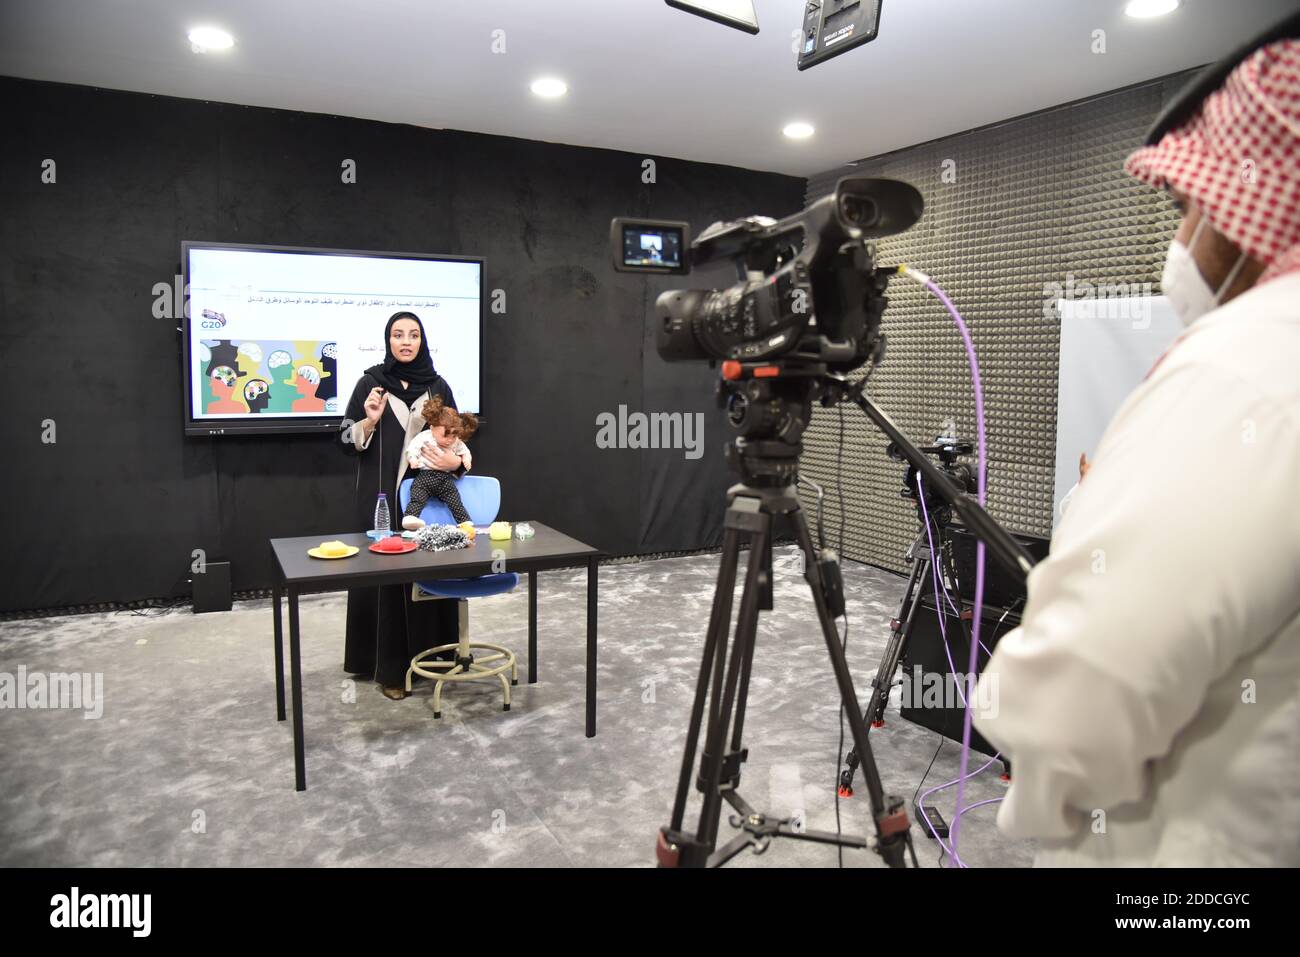 Riyadh, Saudi Arabia. 23rd Nov, 2020. A Saudi teacher participates in recording a lesson at Saudi Arabia's satellite broadcasting school in Riyadh, Saudi Arabia, on Nov. 23, 2020. Saudi Arabia's satellite broadcasting school films 214 educational lessons daily for the kingdom's students to continue learning amid the ongoing COVID-19 pandemic, said Mohammed al-Muqbel, Saudi deputy minister for general education. Credit: Tu Yifan/Xinhua/Alamy Live News Stock Photo